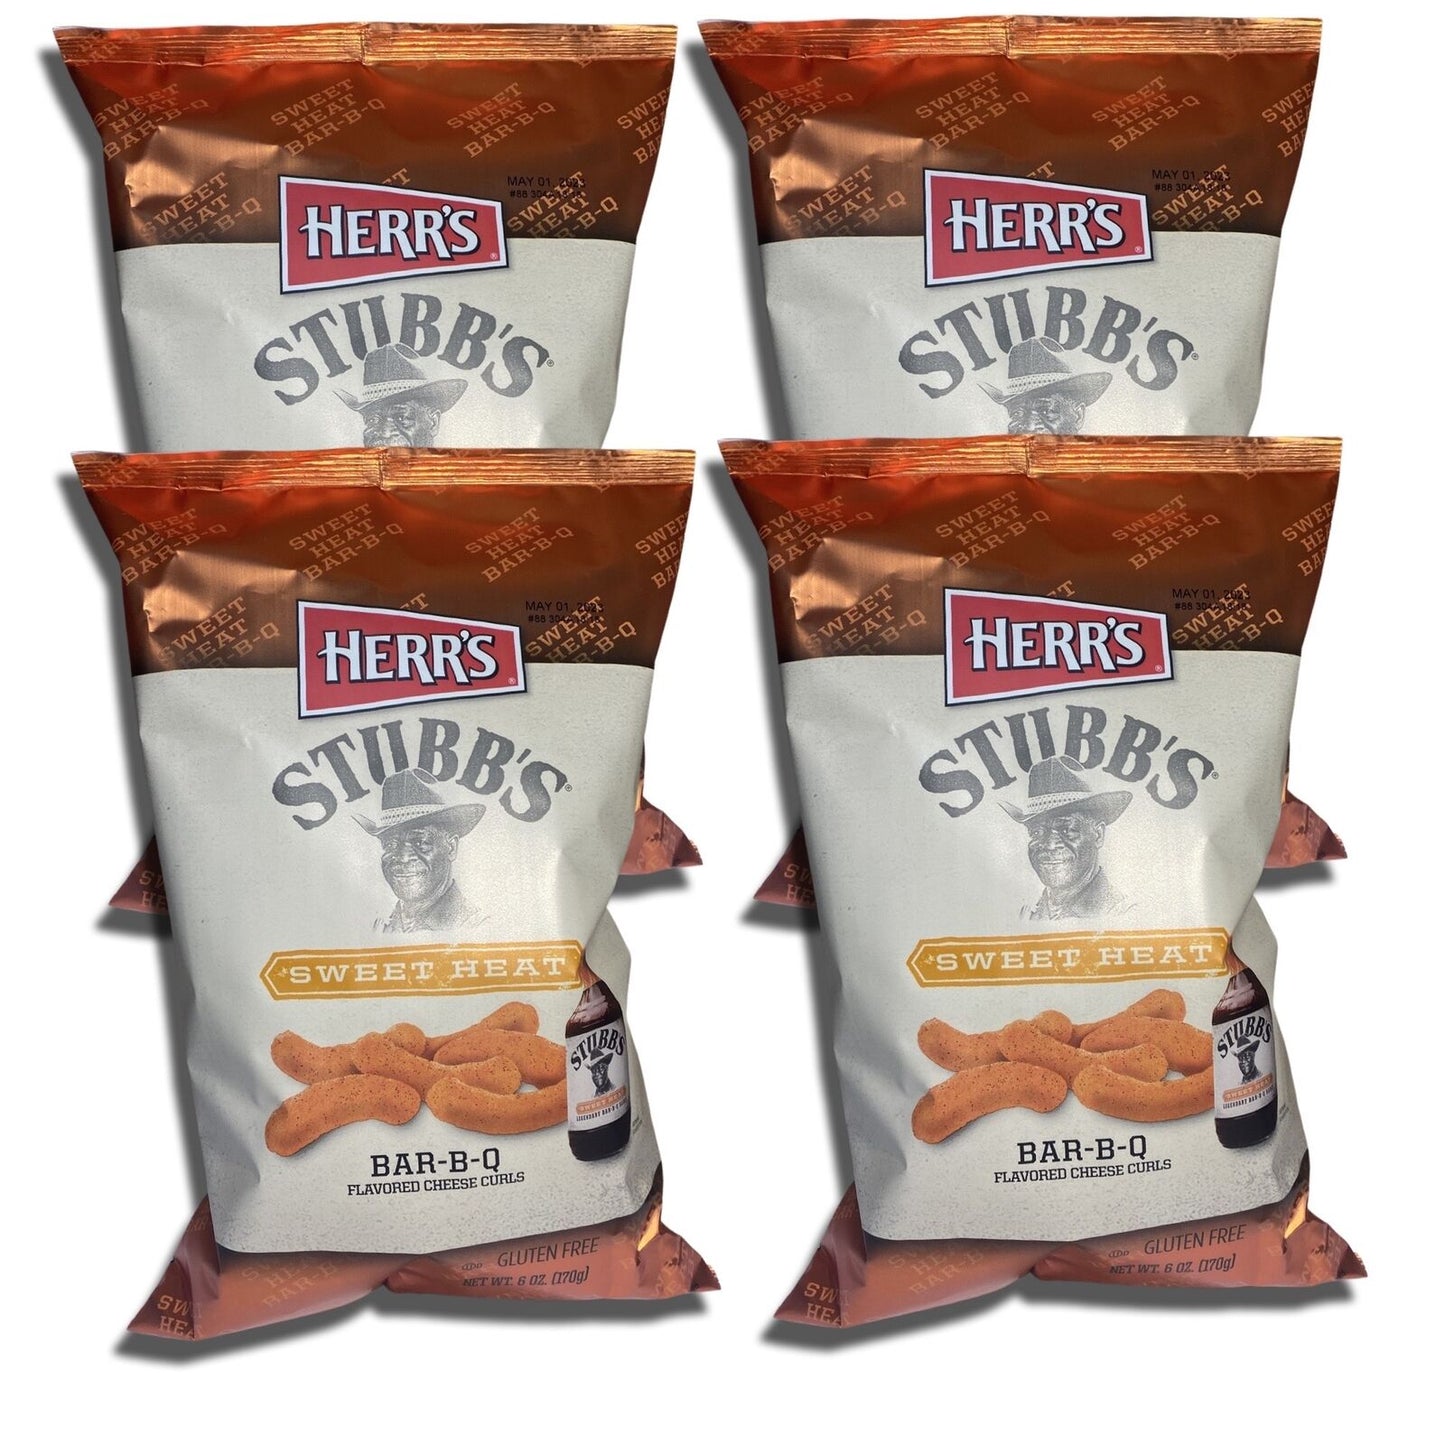 Tribeca Curations | Sweet Heat Bar-B-Q Cheese Curls by Herr'S Bundled By